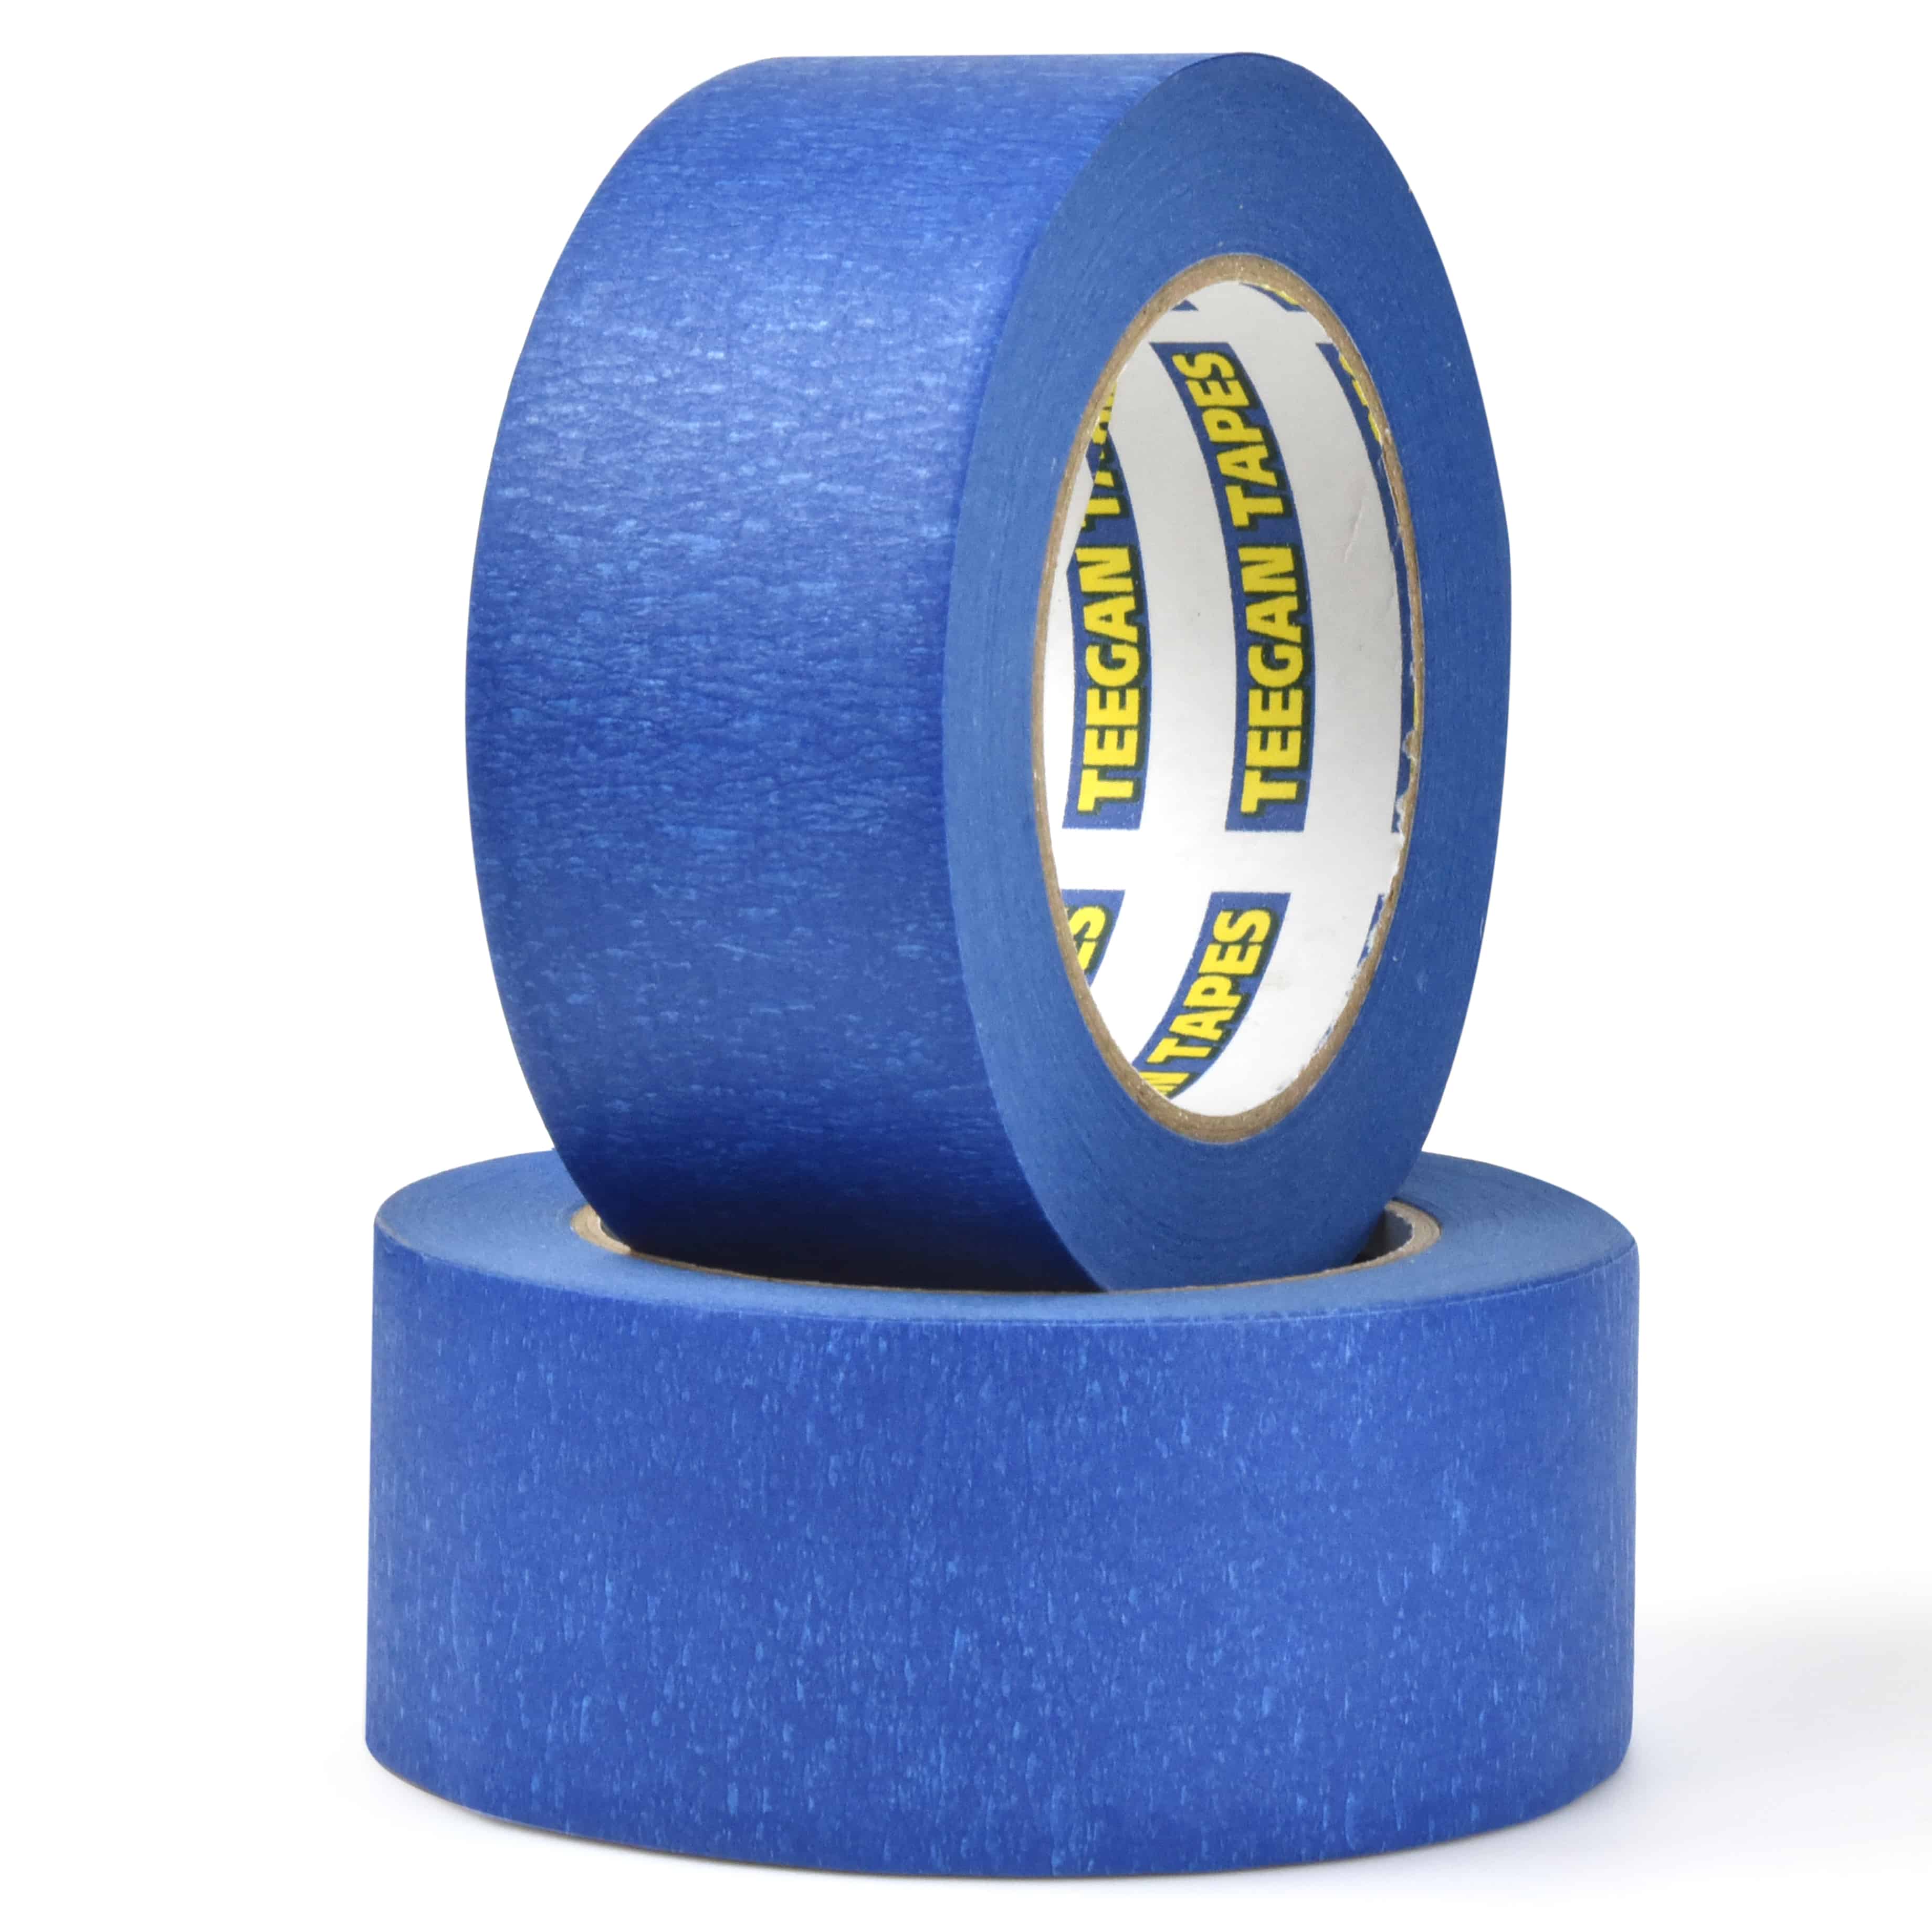 Painters Tape (2-Pack), 2 Inch by 50 yards, Prevents Paint Bleed